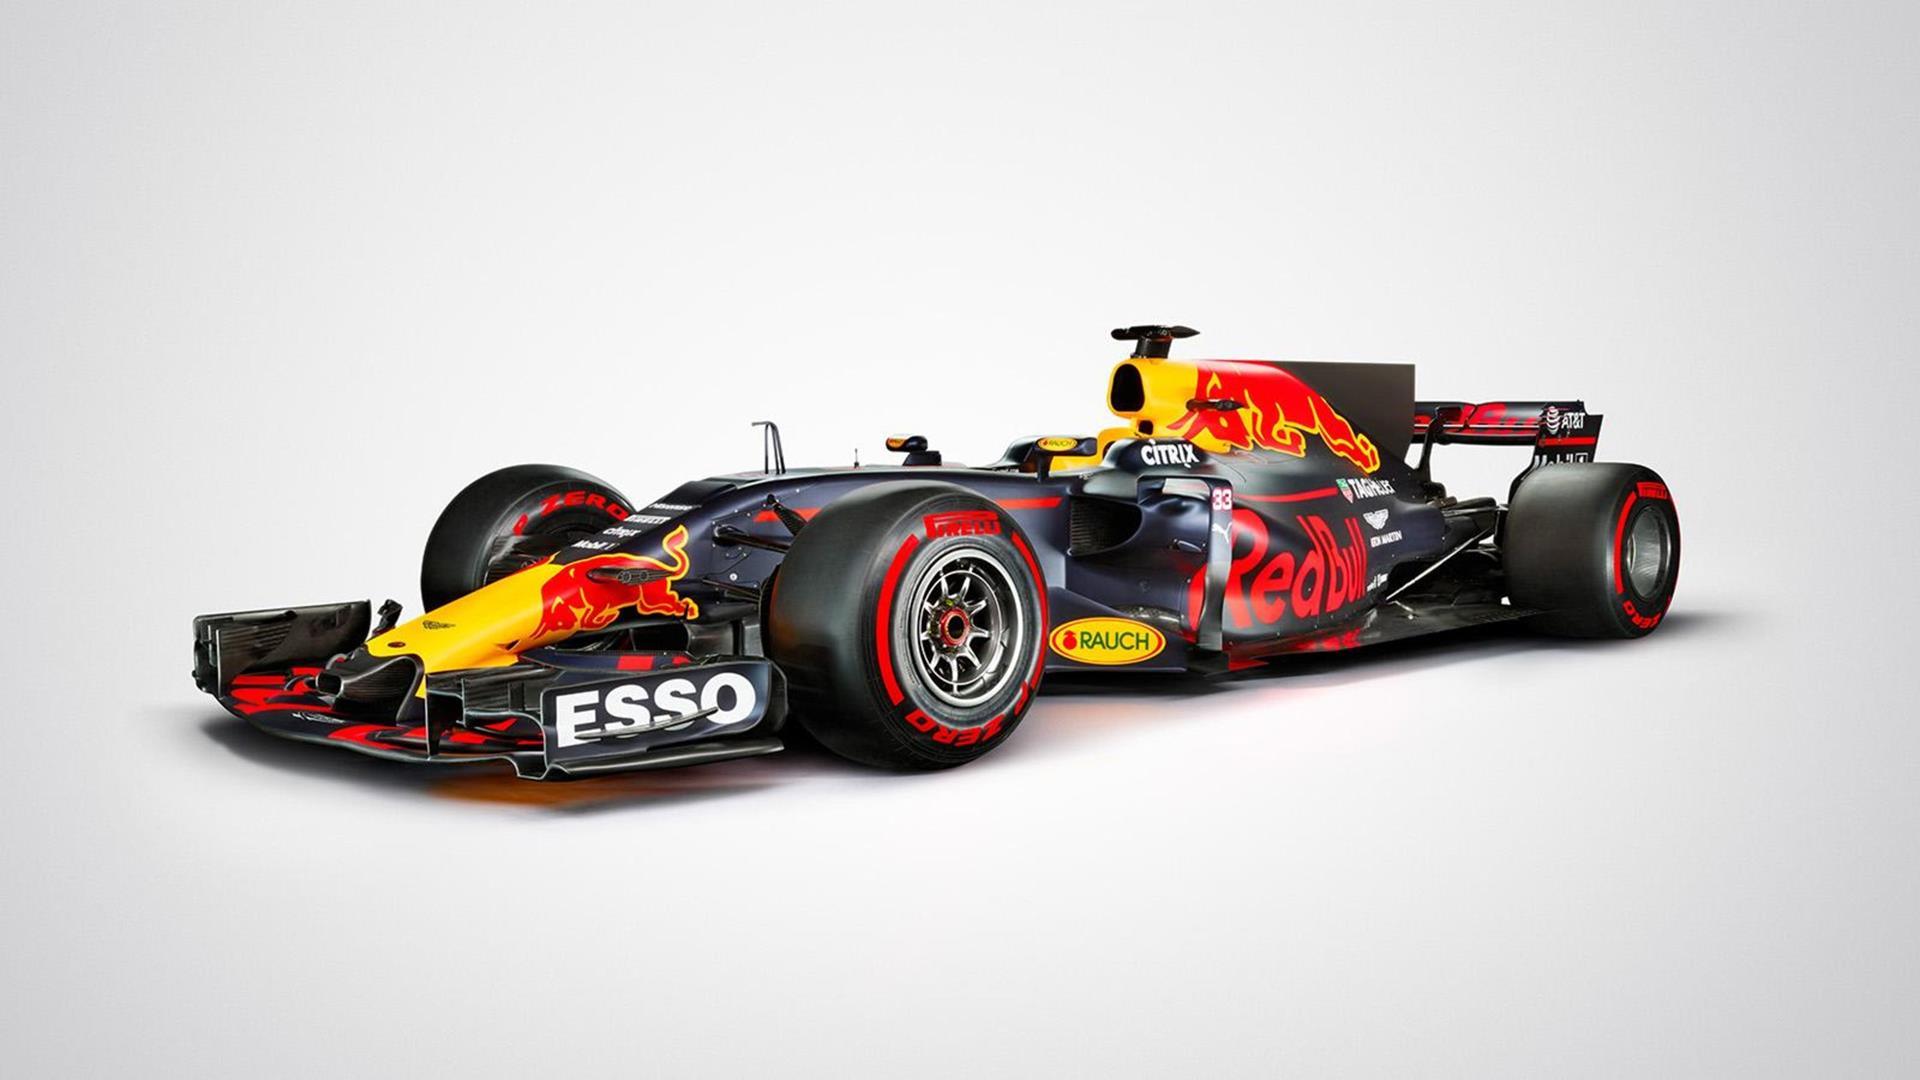 2017 Red Bull RB13 Image. Photo 1 of 4